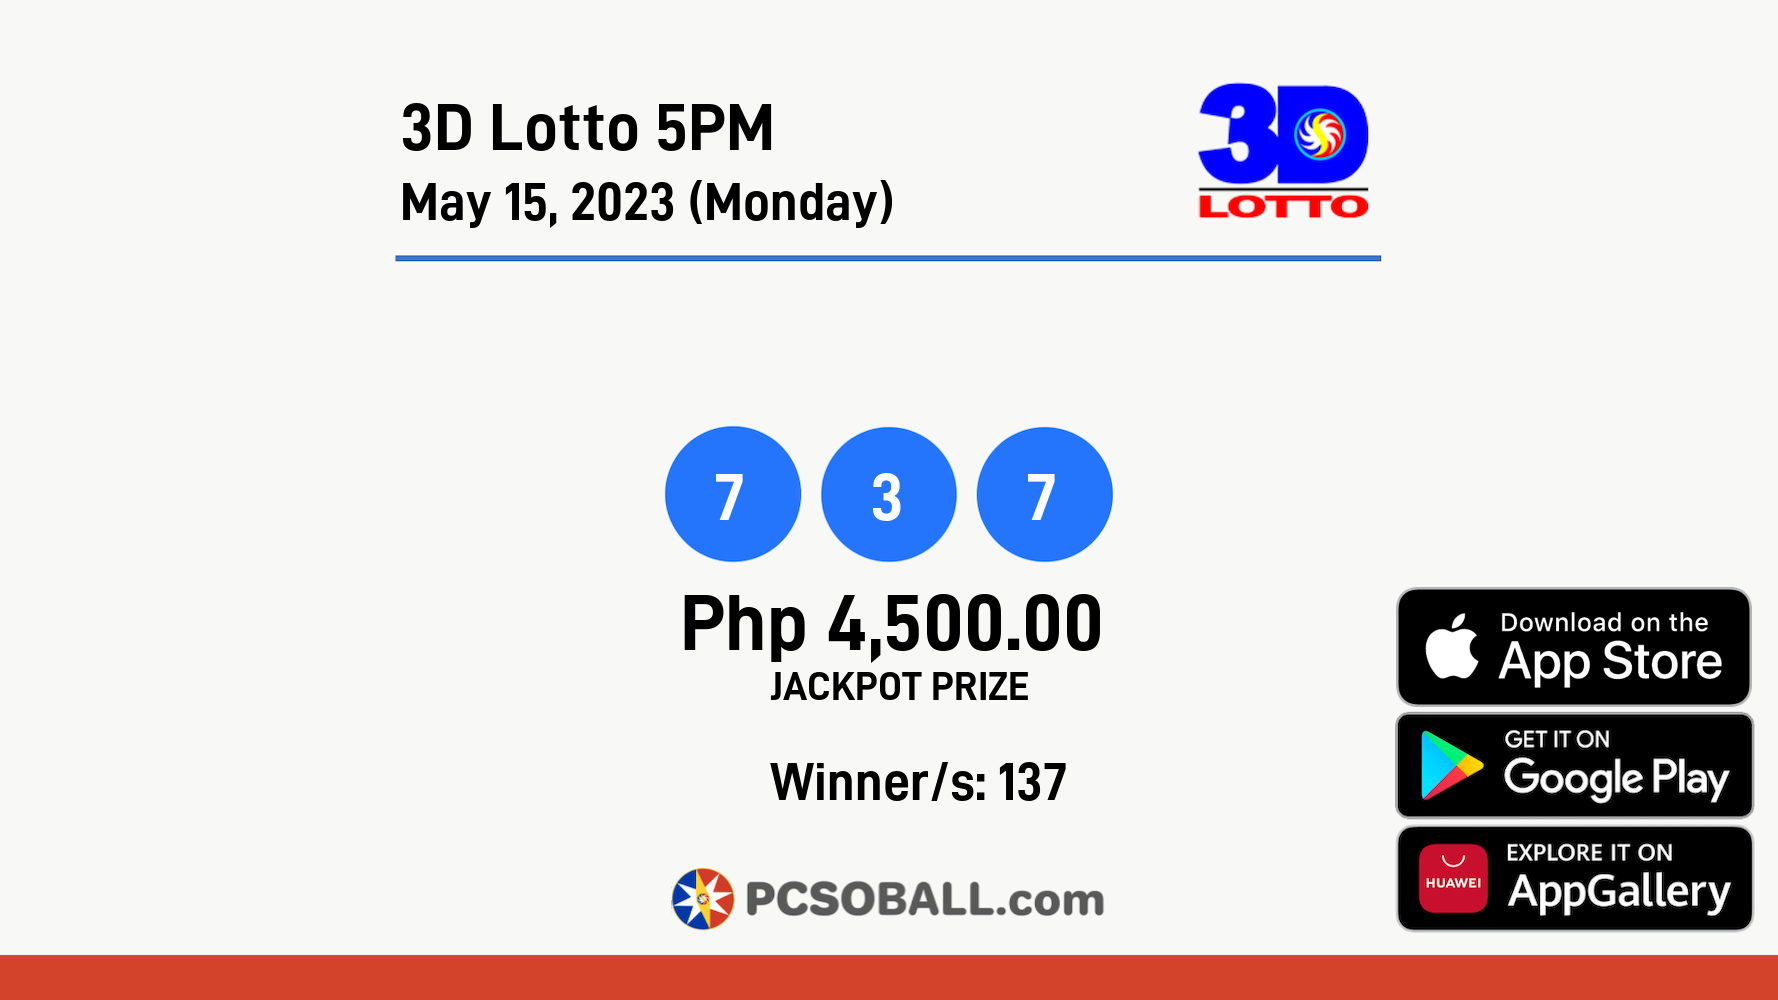 3D Lotto 5PM May 15, 2023 (Monday) Result